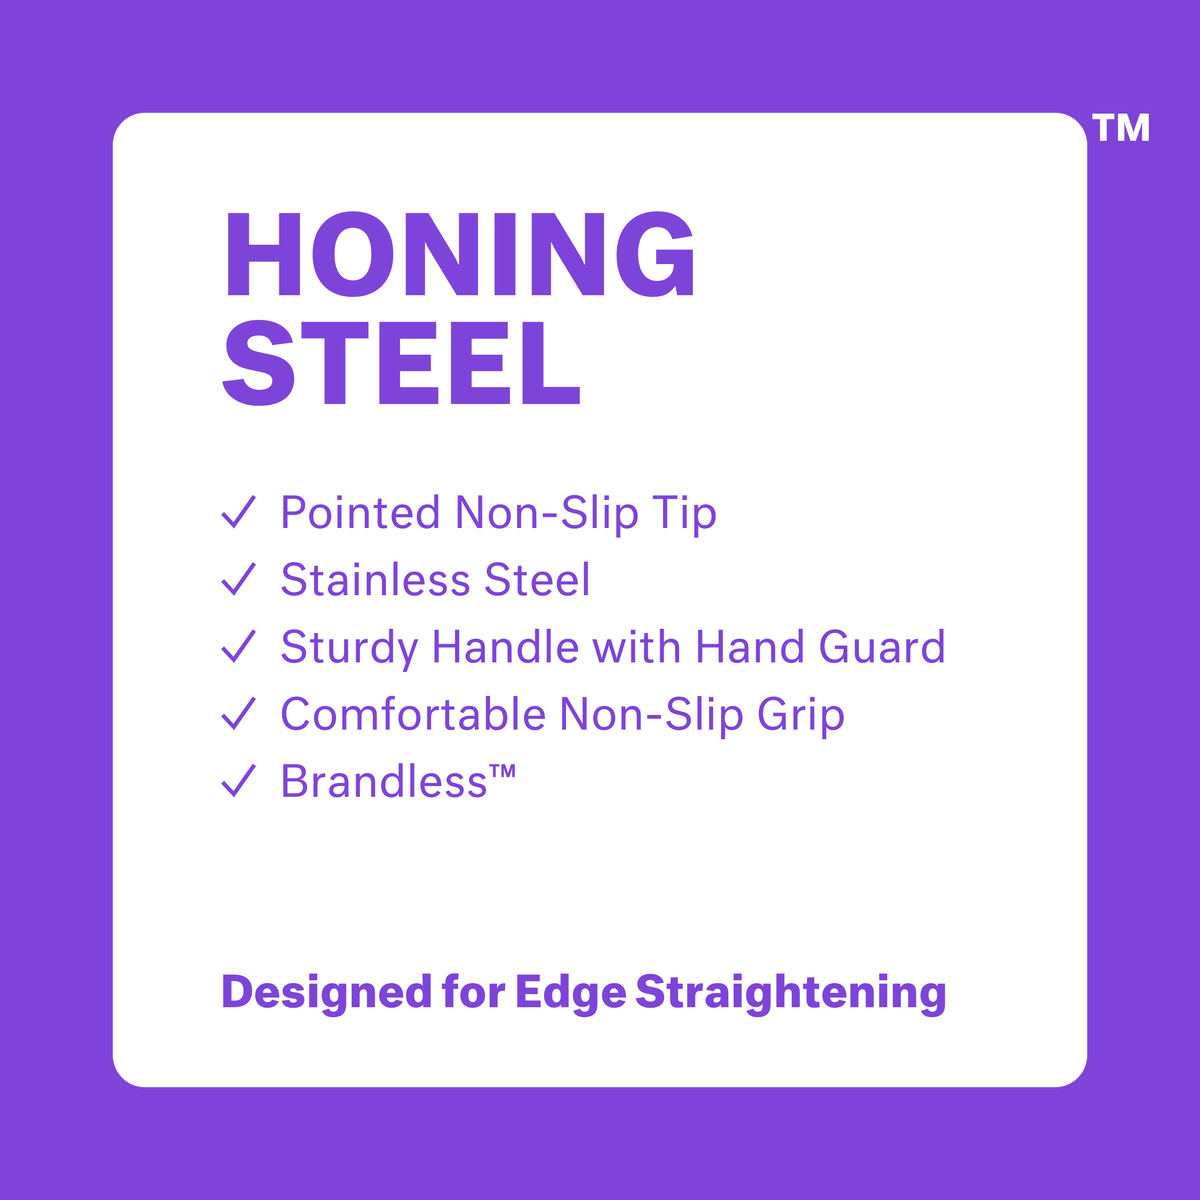 Honing steel: pointed non-slip tip, stainless steel, sturdy handle with hand guard, comfortable non-slip grip, brandless. Designed for edge straightening.